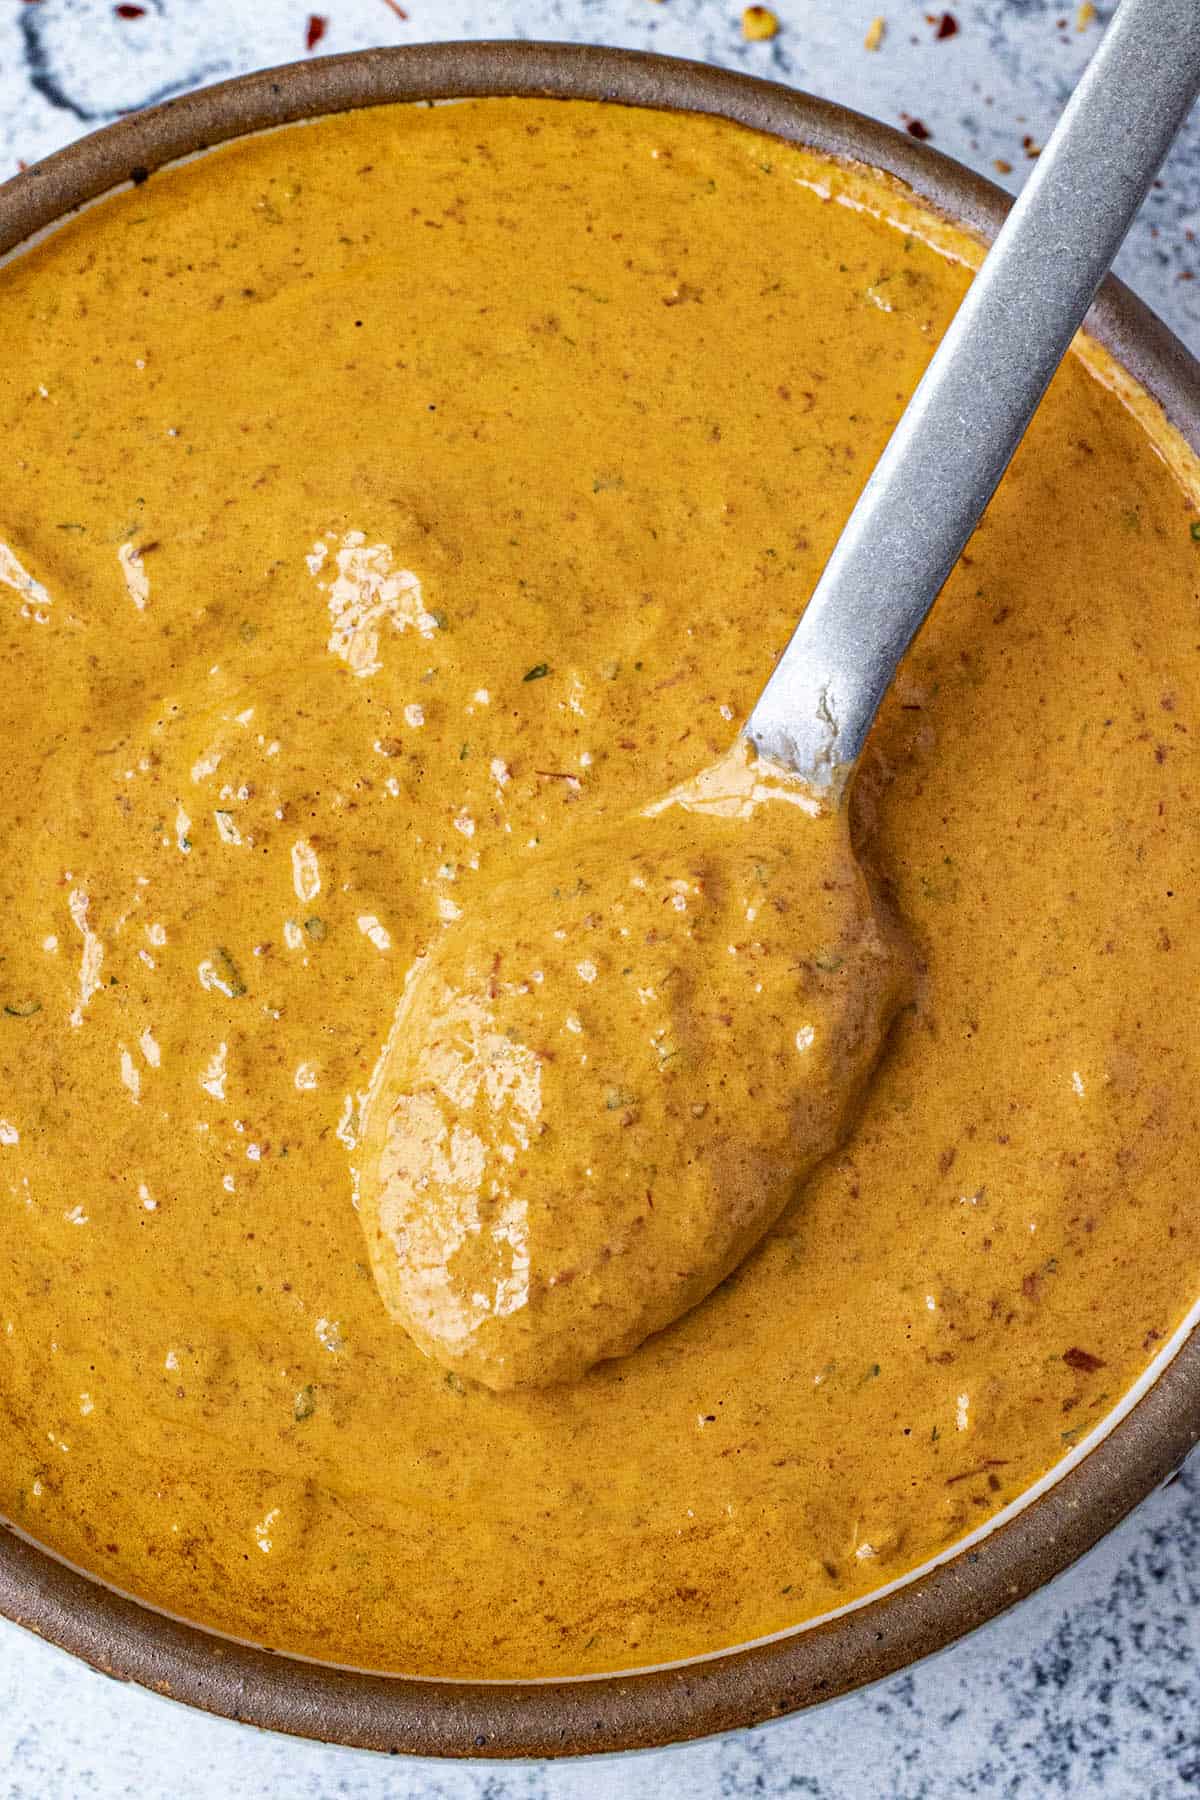 Scooping creamy Chipotle Sauce